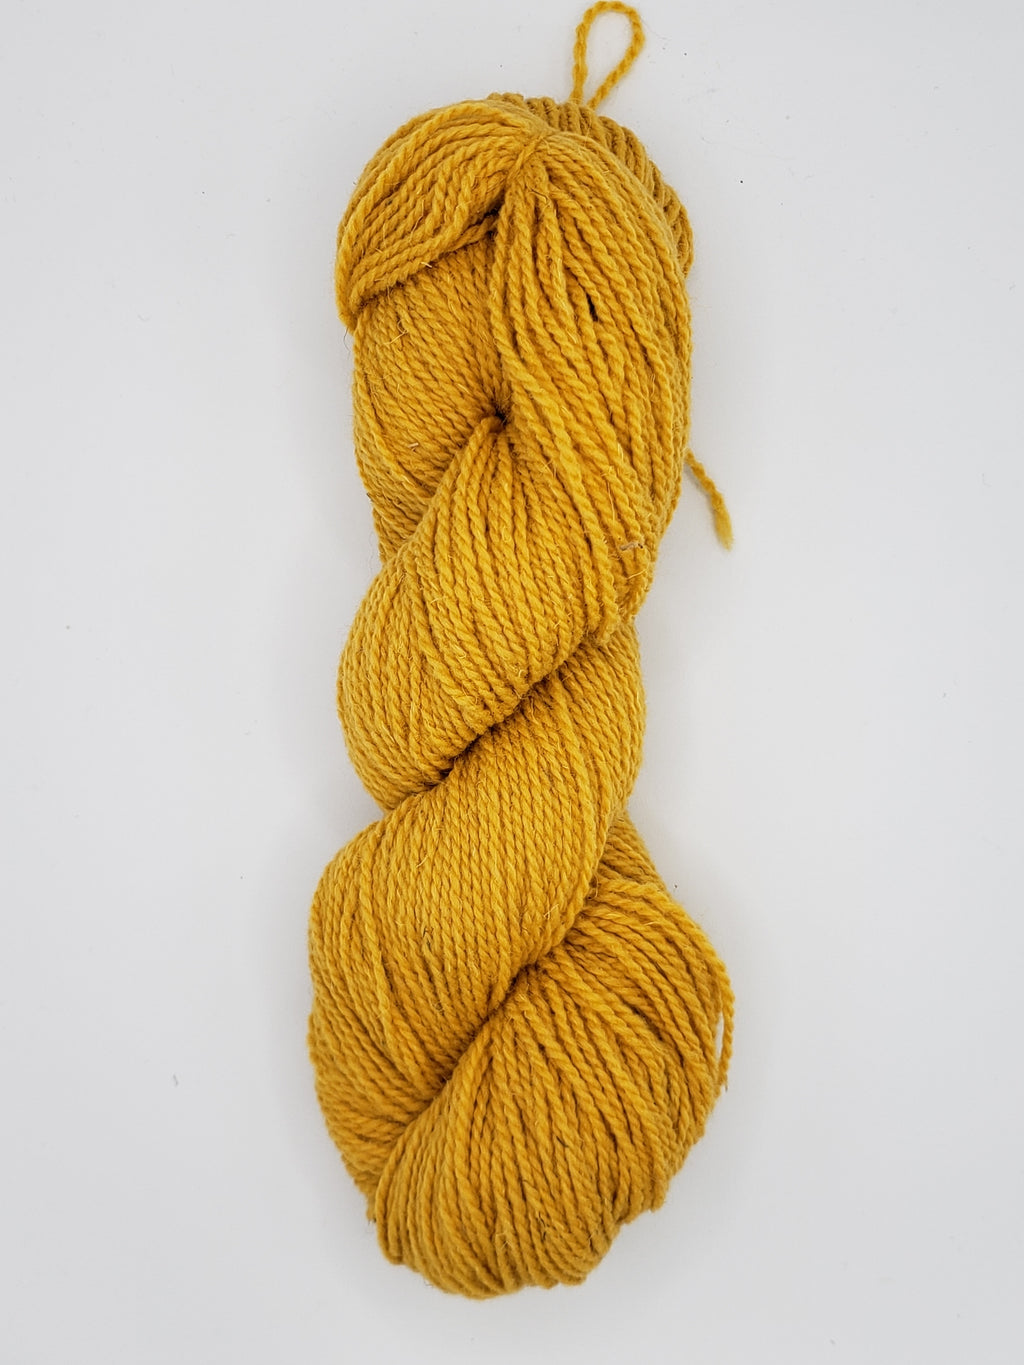 ISLAND WOOL - GOLD - 2 Ply Worsted Yarn for Rug Hooking